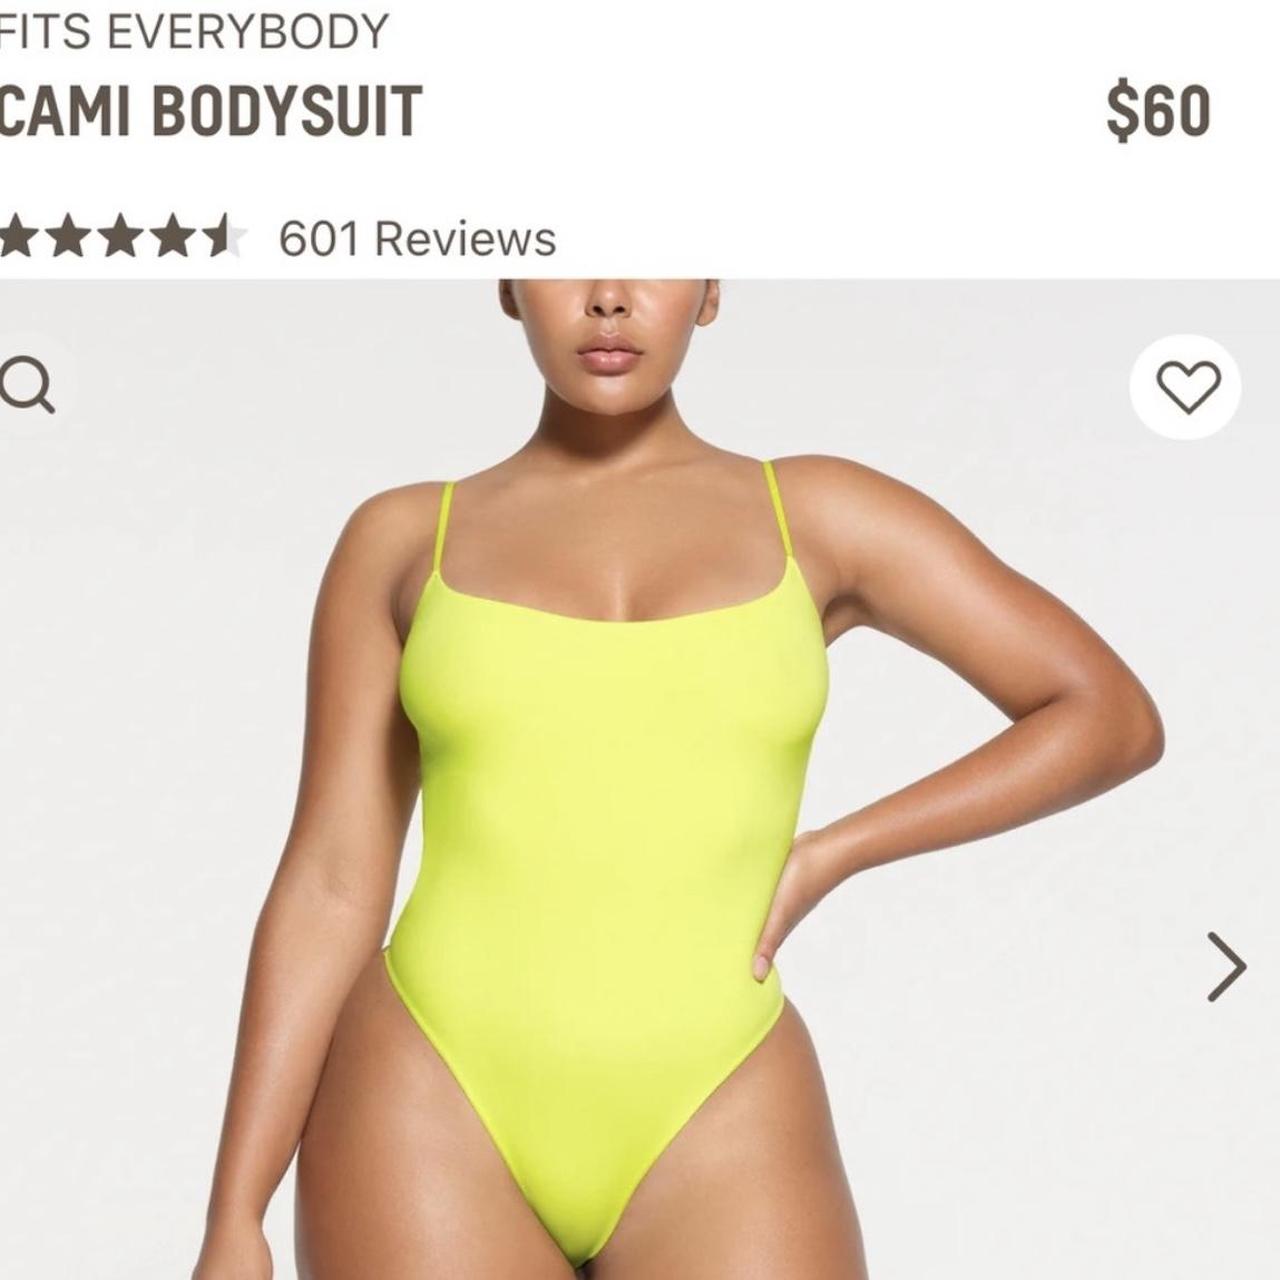 Skims Fits Everybody Bodysuit Color is Daffodil - Depop